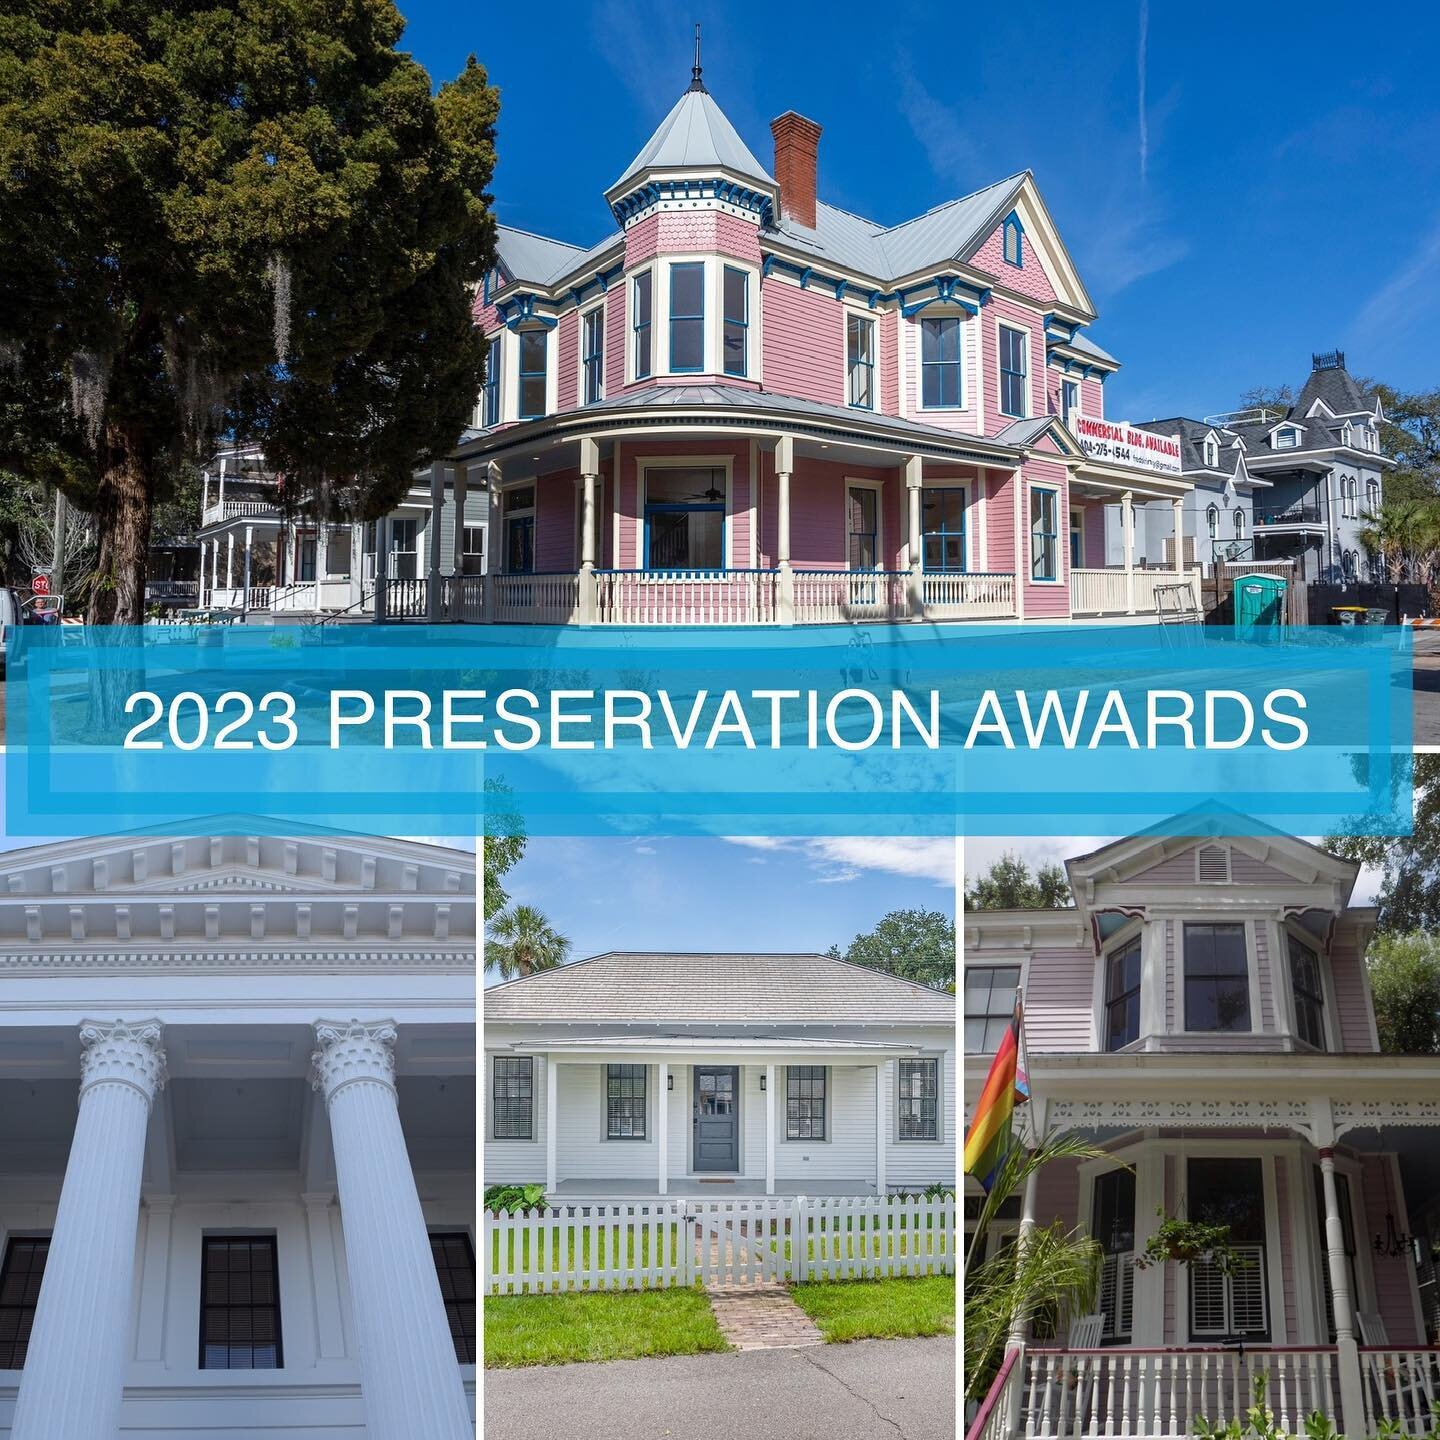 Congratulations to our amazing clients and professional team (Josh Ward, Sarah Ward, Susie Bull and Colleen Willoughby) on your well-deserved preservation awards from @myhsf.  We have great clients and loved working with you on these historic propert